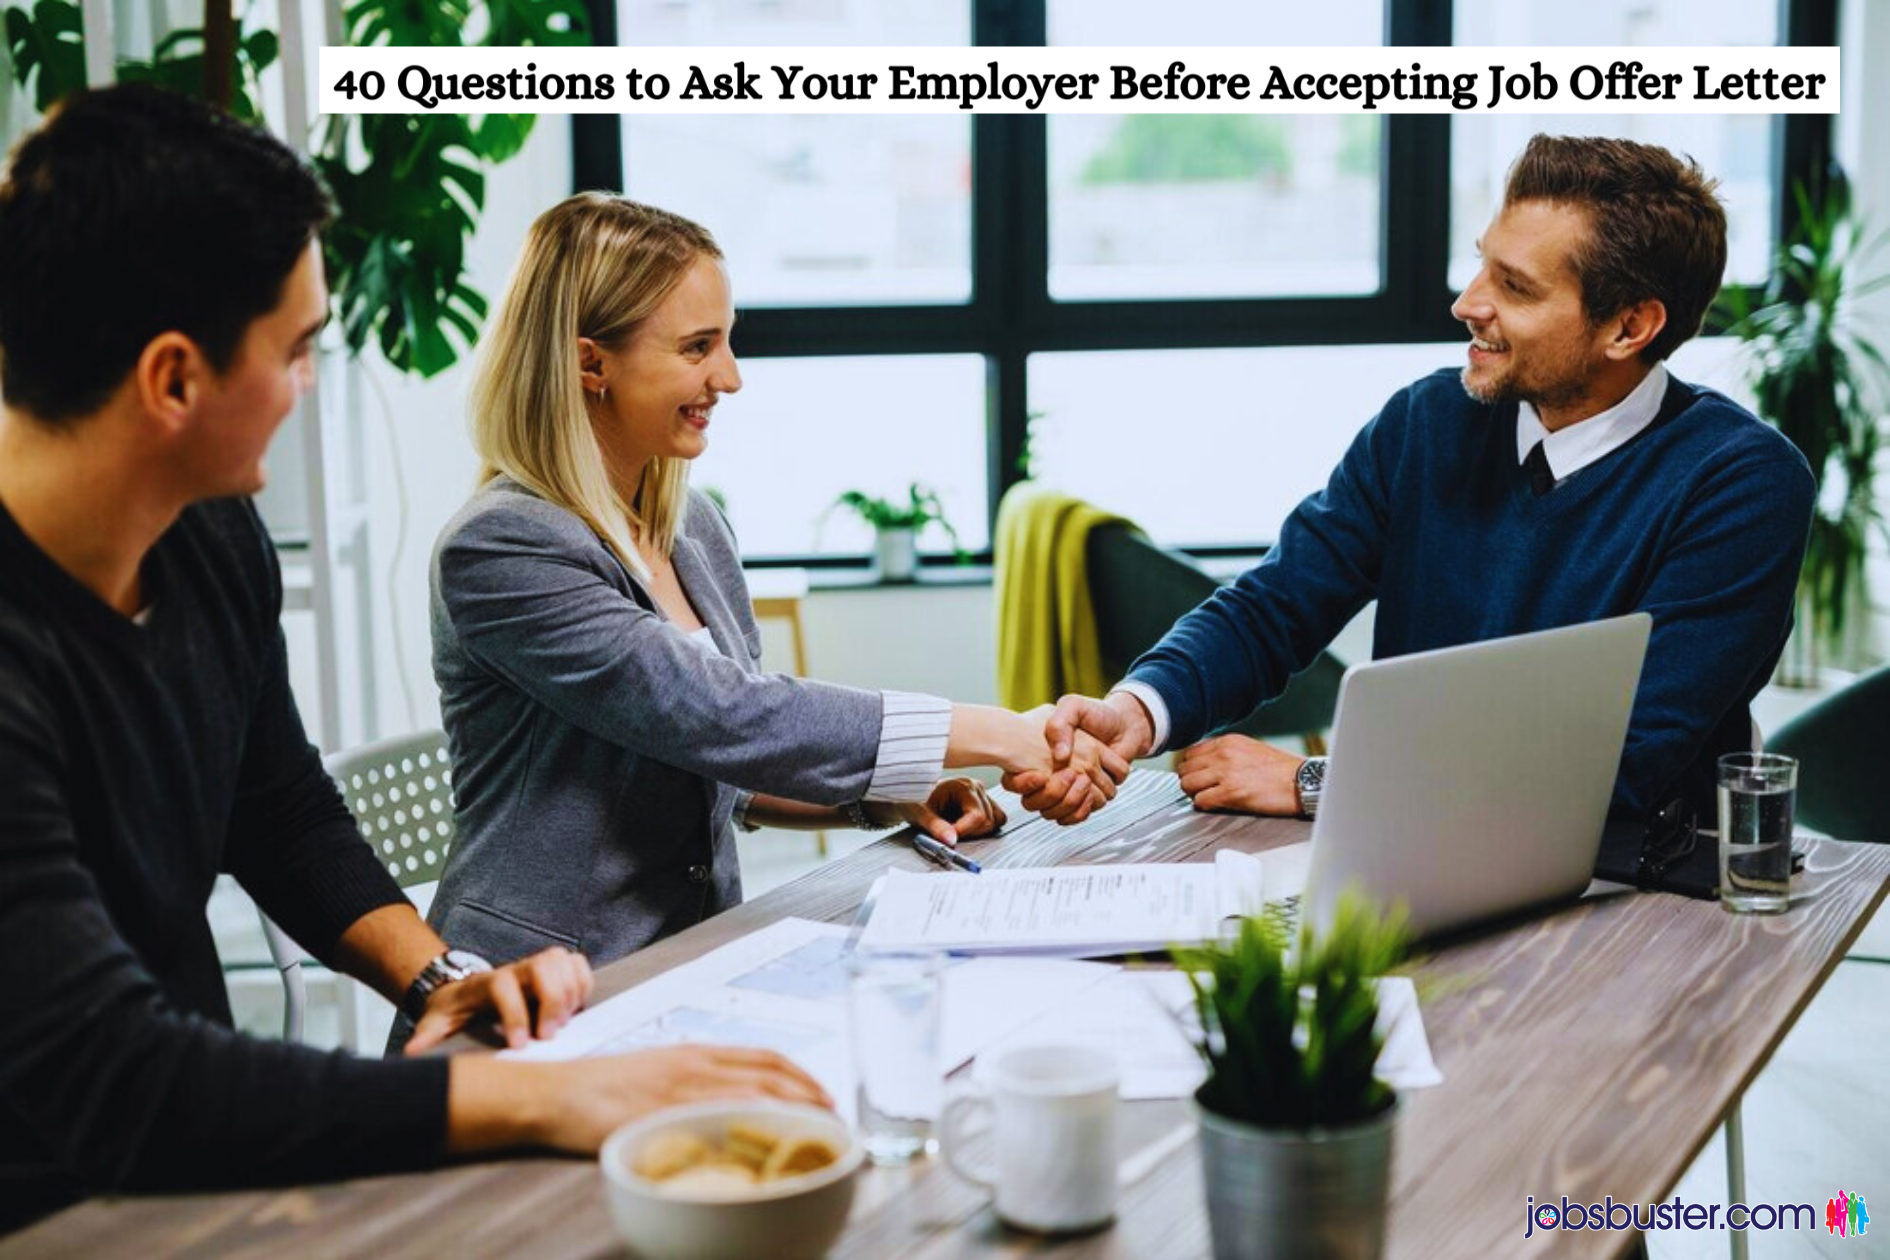 40 Questions to Ask Your Employer Before Accepting Job Offer Letter - Jobsbuster.com